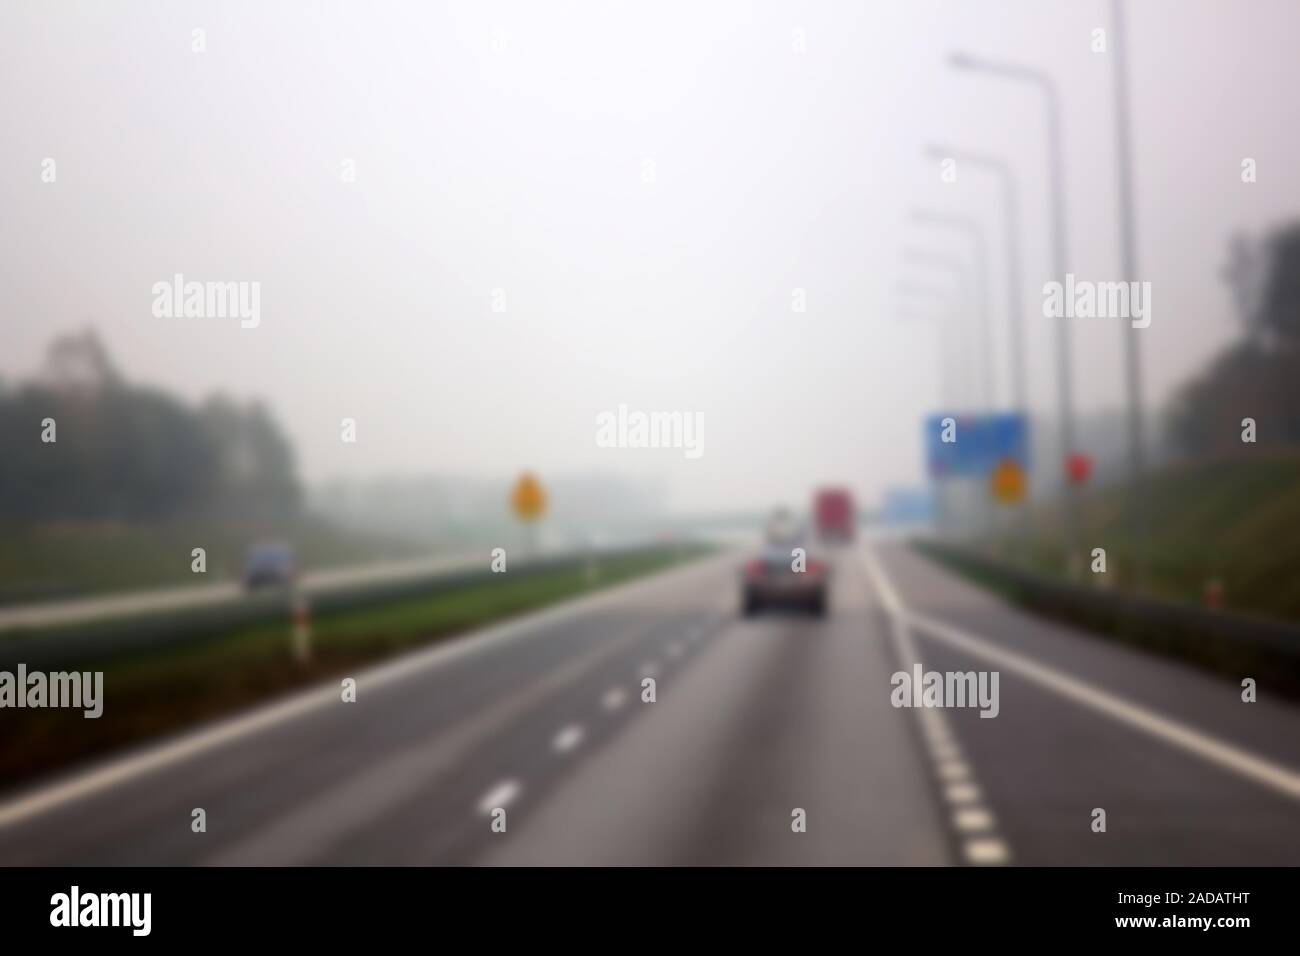 Strong blurred unrecognizable vehicles Stock Photo